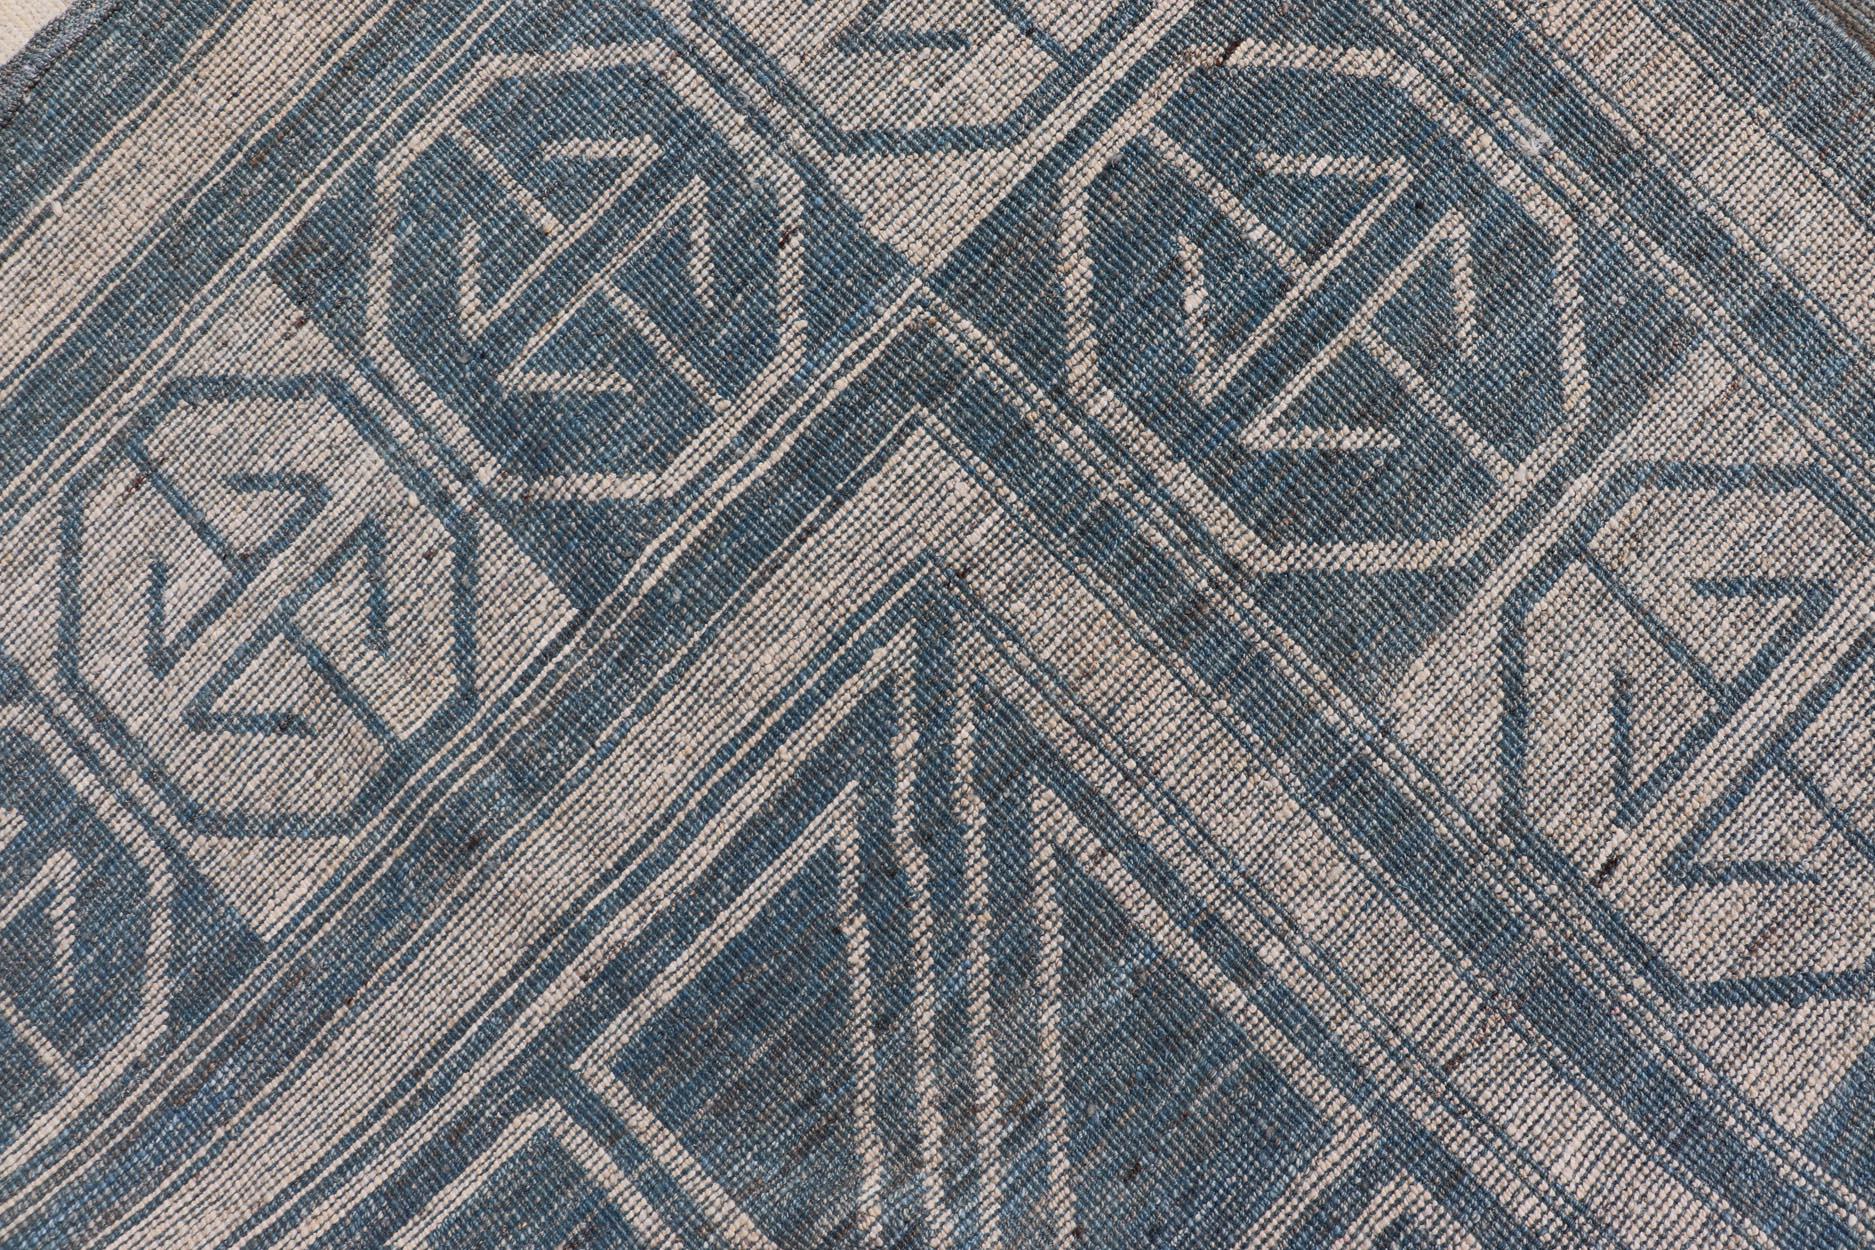 Modern Khotan Rug with Circular Medallions in Shades of Steel Blue & off White For Sale 8